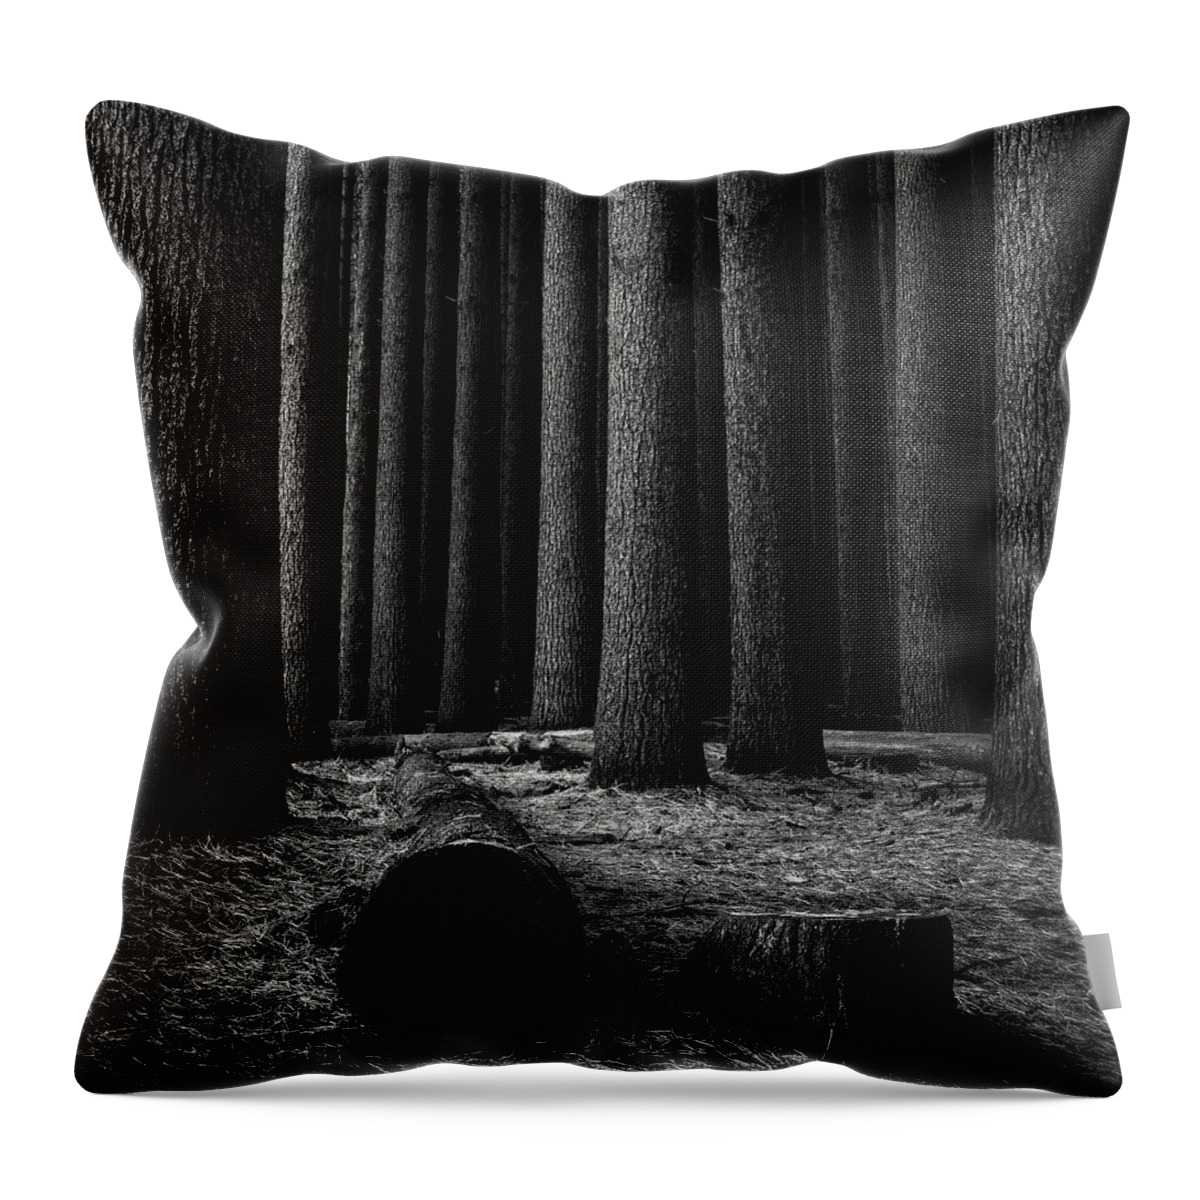 Landscape Throw Pillow featuring the photograph Sugar Pines by Grant Galbraith